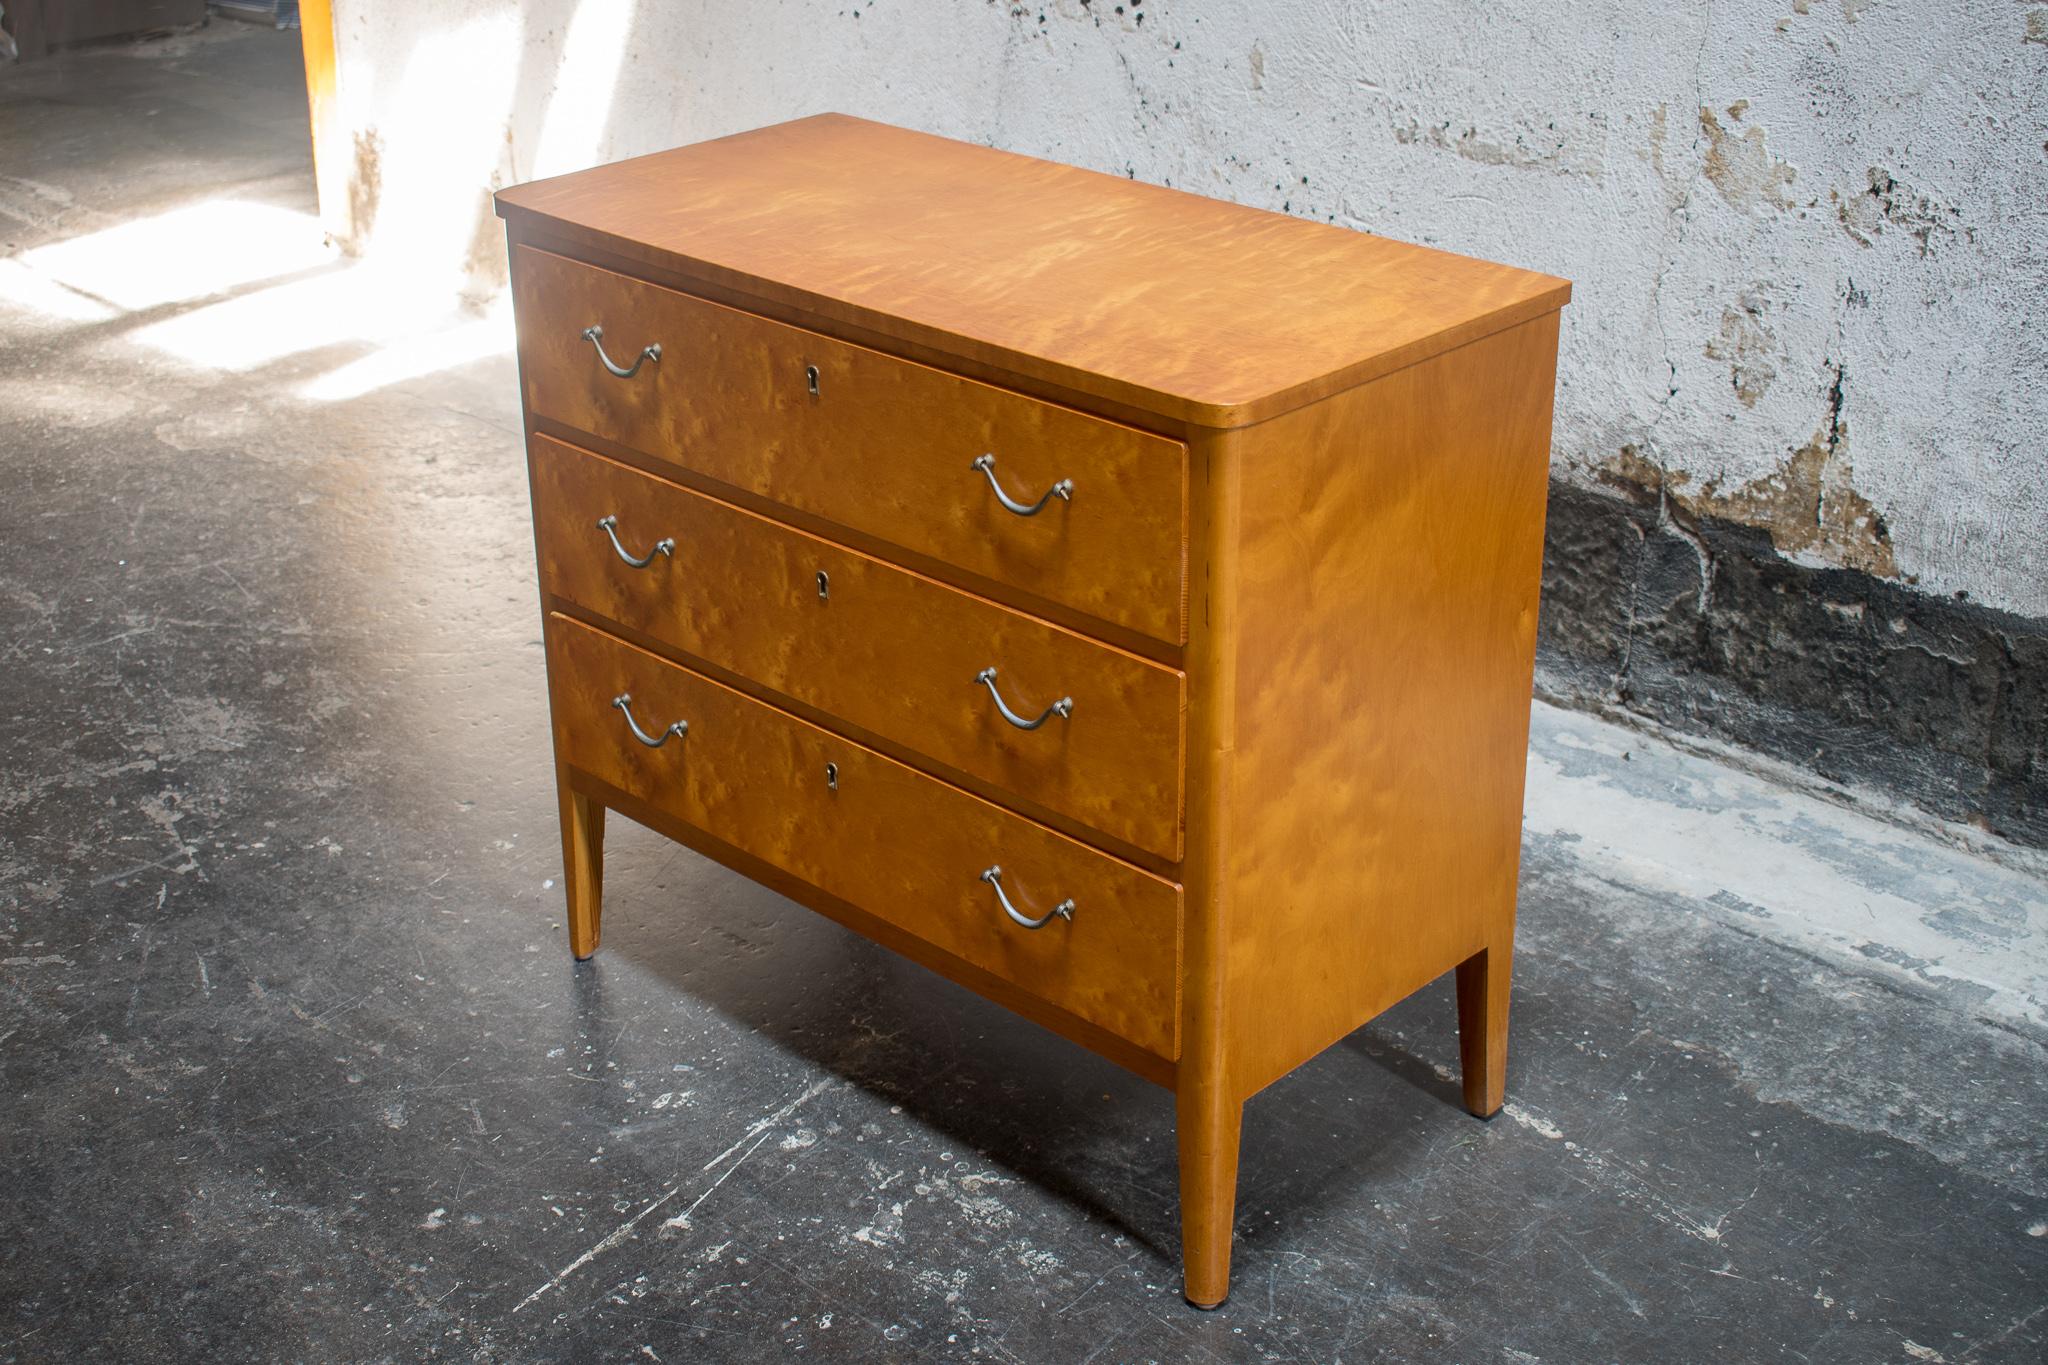 Midcentury Swedish Chest of Drawers in Blond Birch In Good Condition For Sale In Atlanta, GA